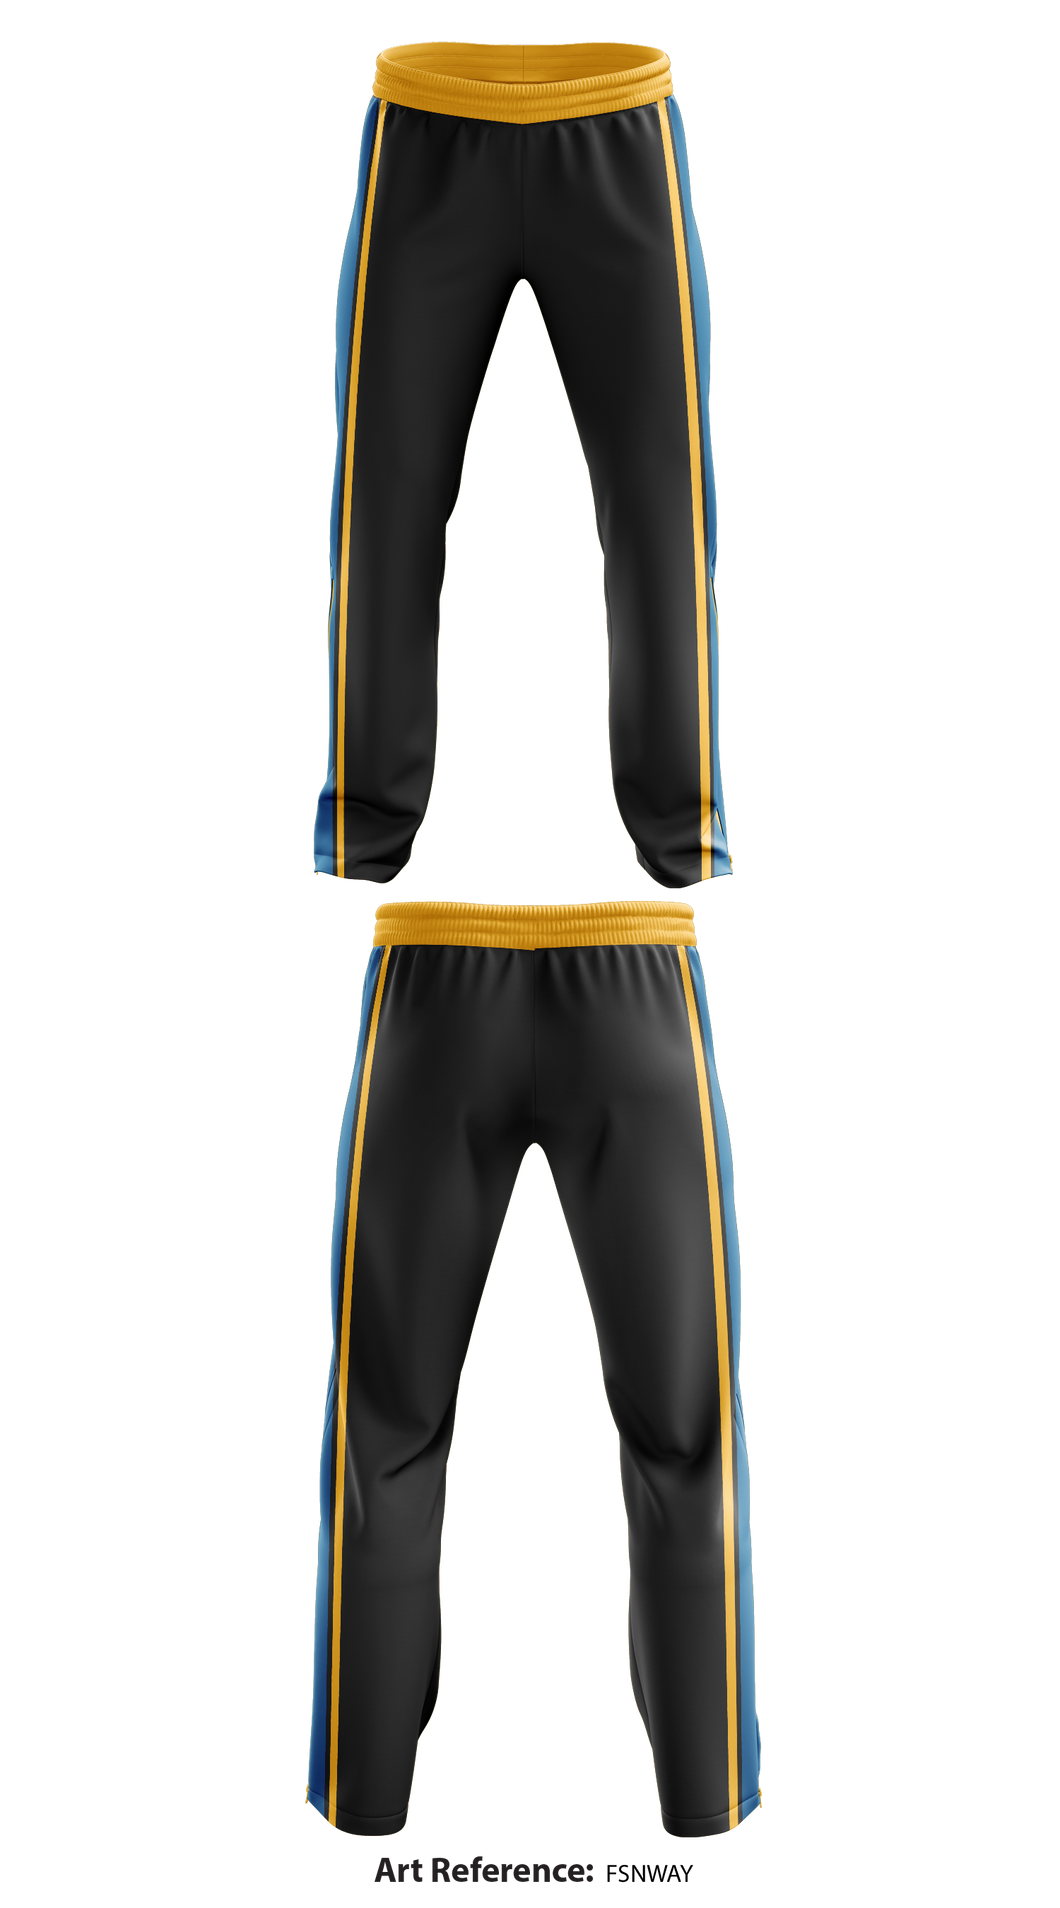 Crook county track and field 35180258 Sweatpants - 1